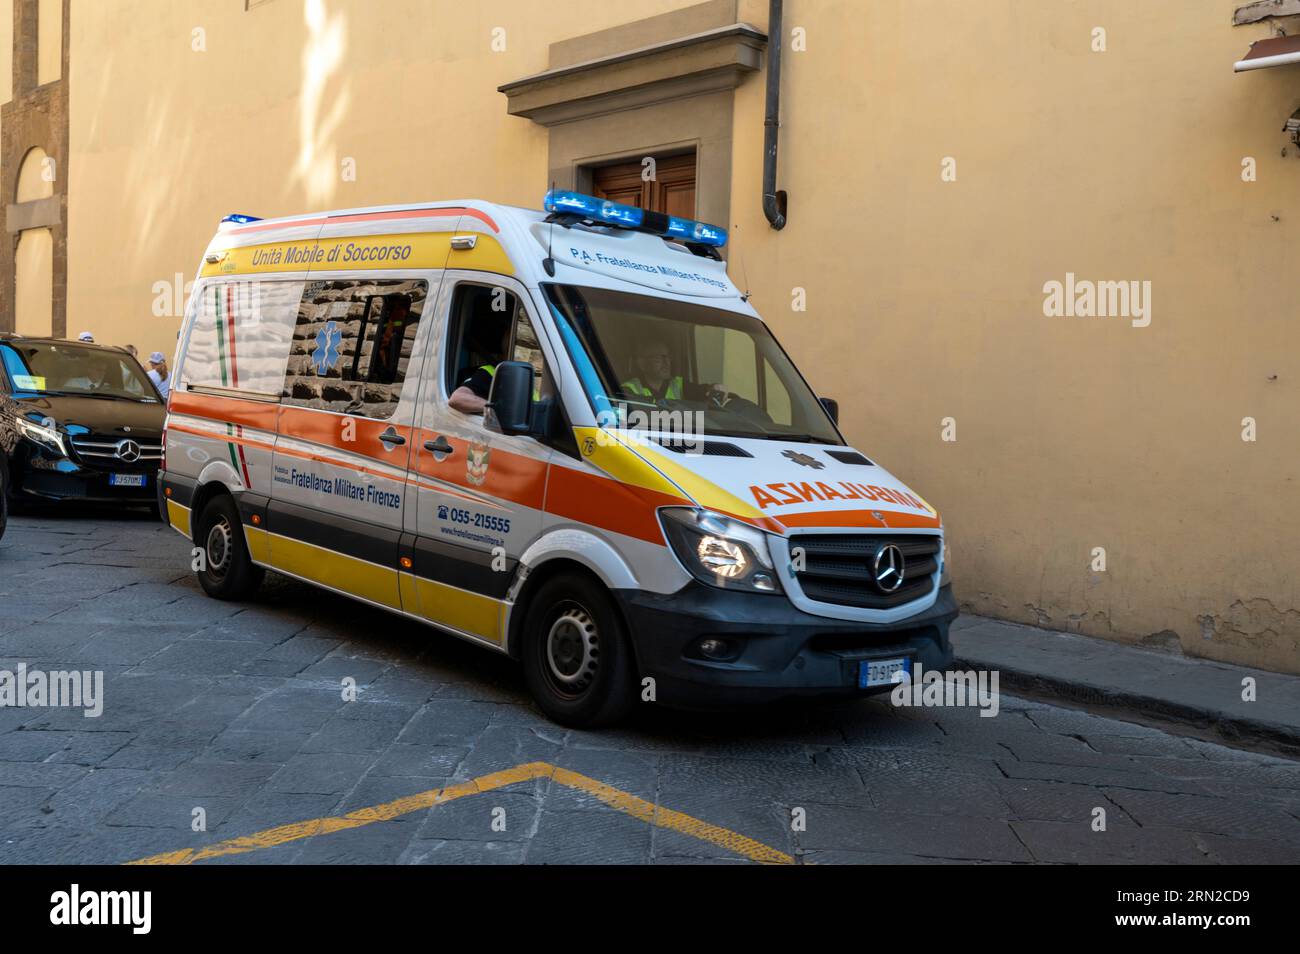 An ambulance on an emergency call speeds through the narrow medieval streets of Florence in the Tuscany region of Italy Stock Photo